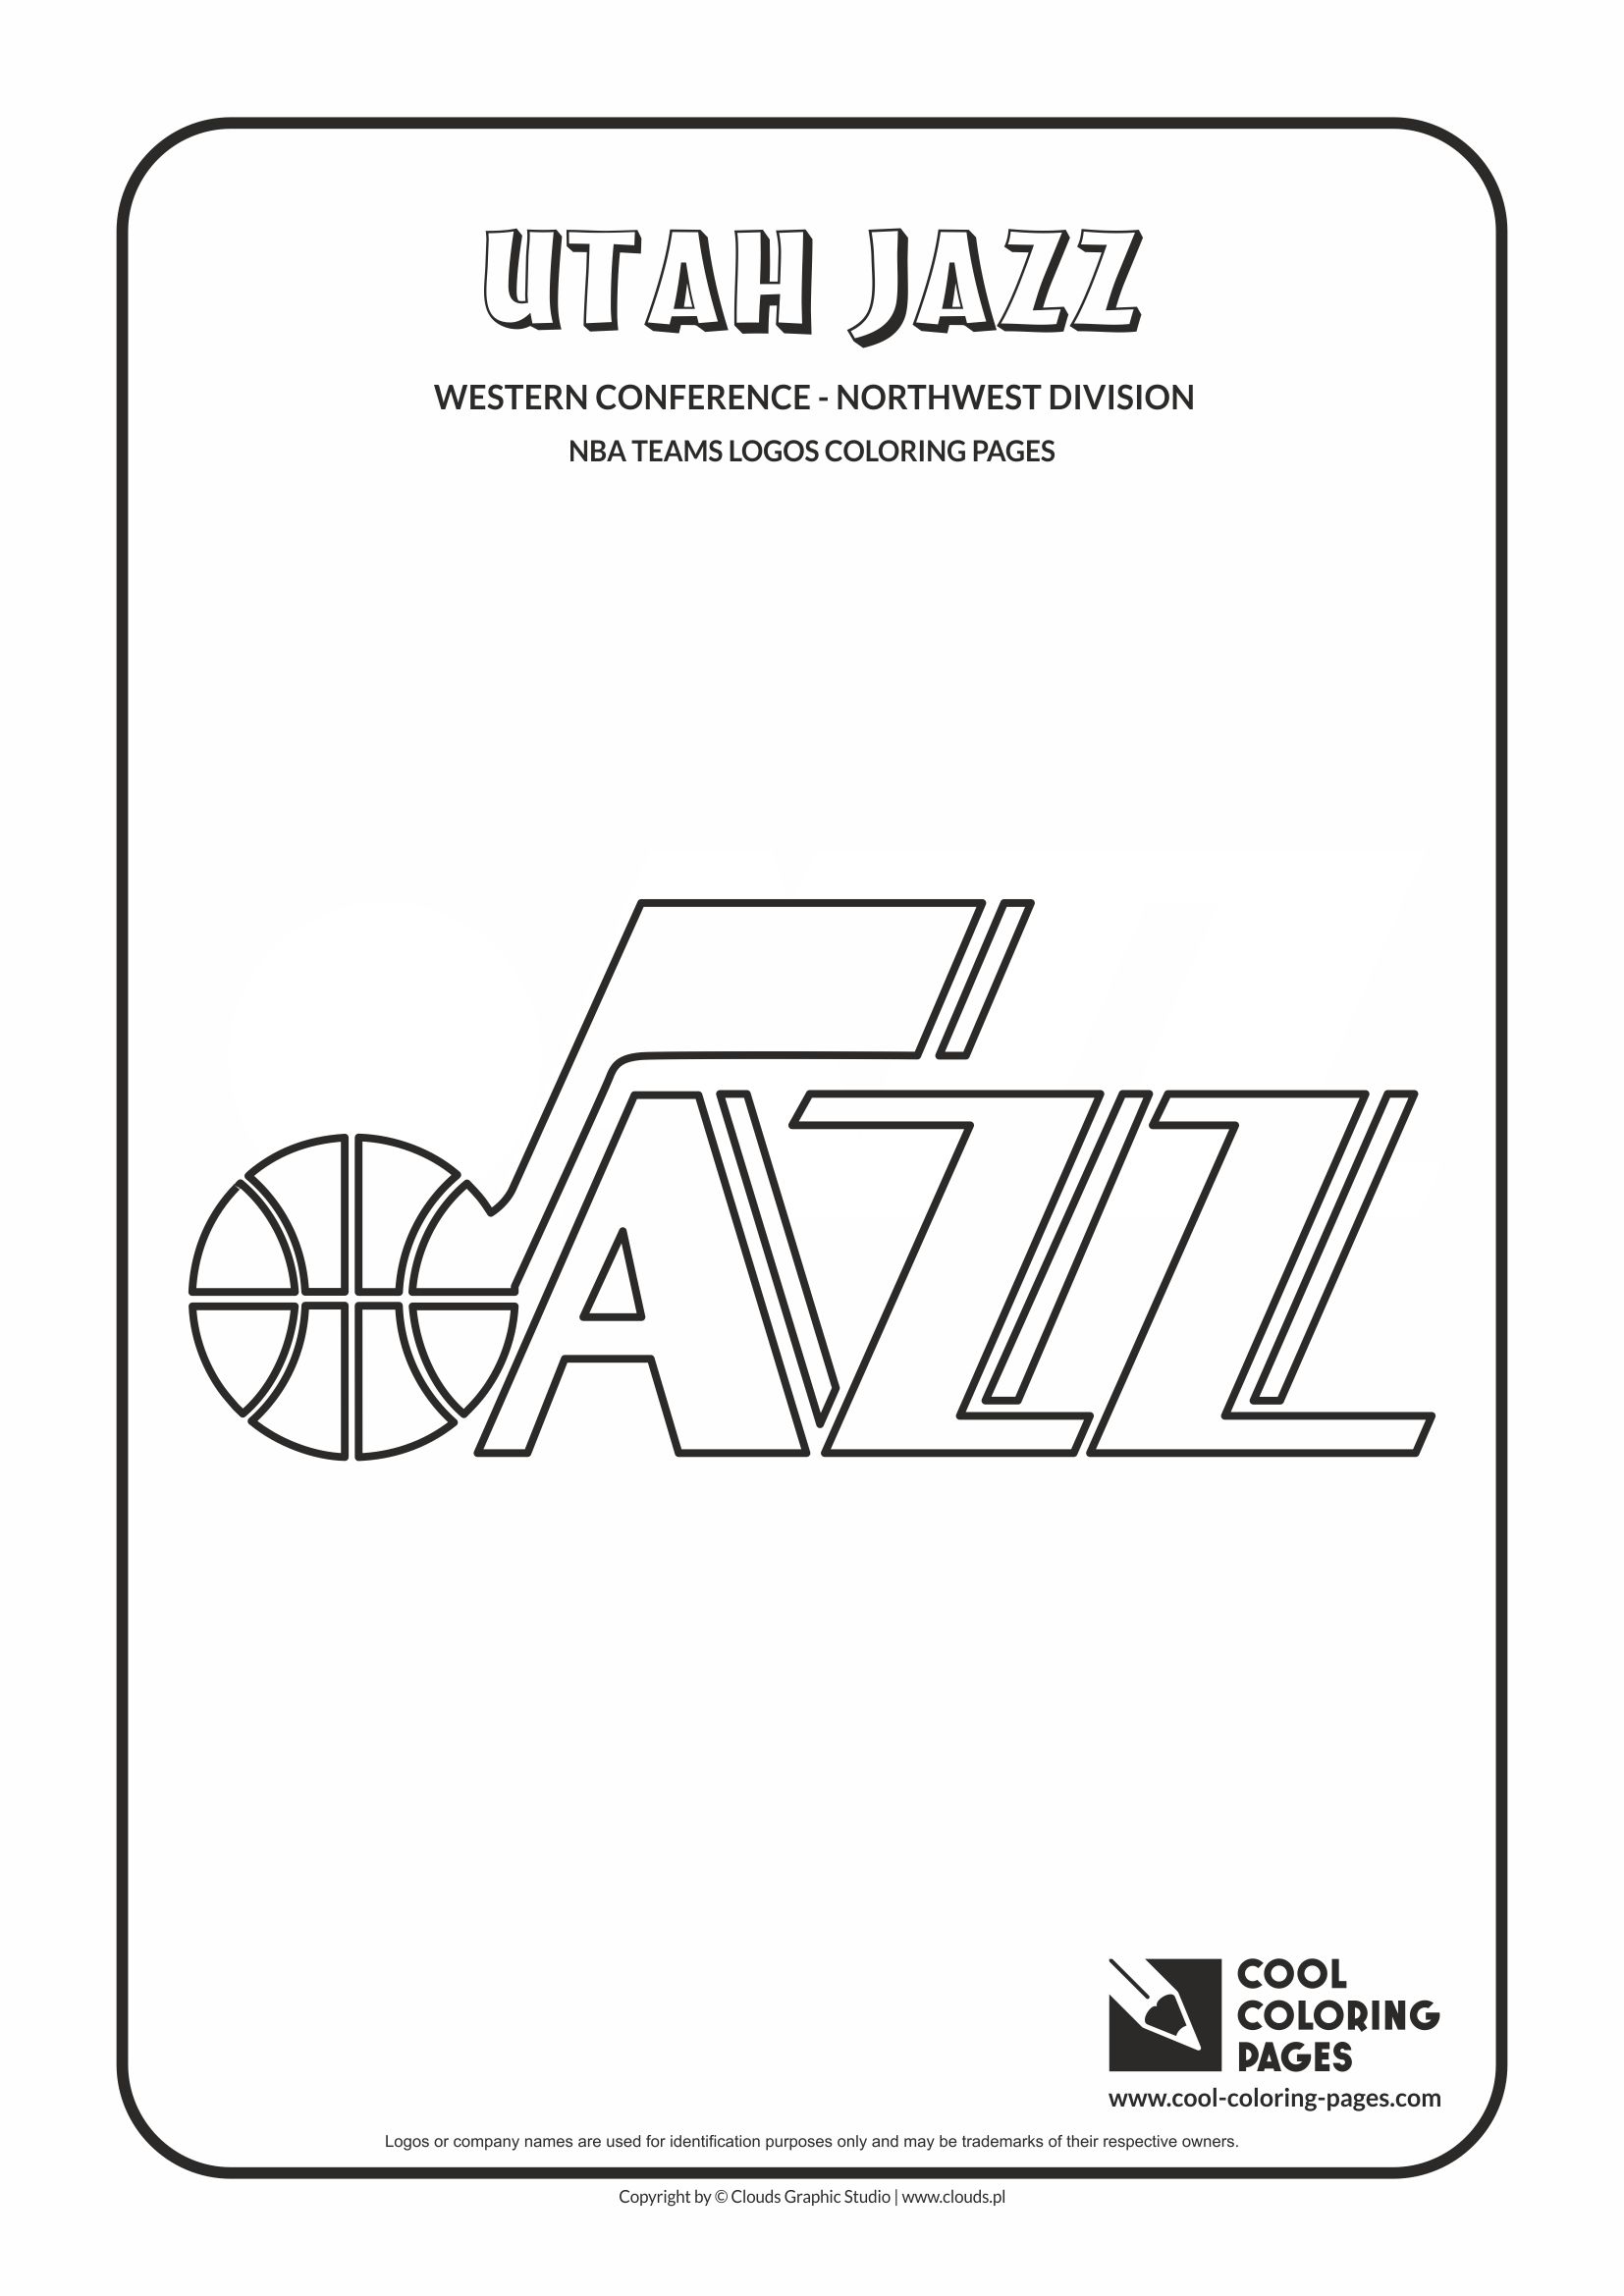 Cool Coloring Pages - NBA Basketball Clubs Logos - Western Conference - Northwest Division / Utah Jazz logo / Coloring page with Utah Jazz logo